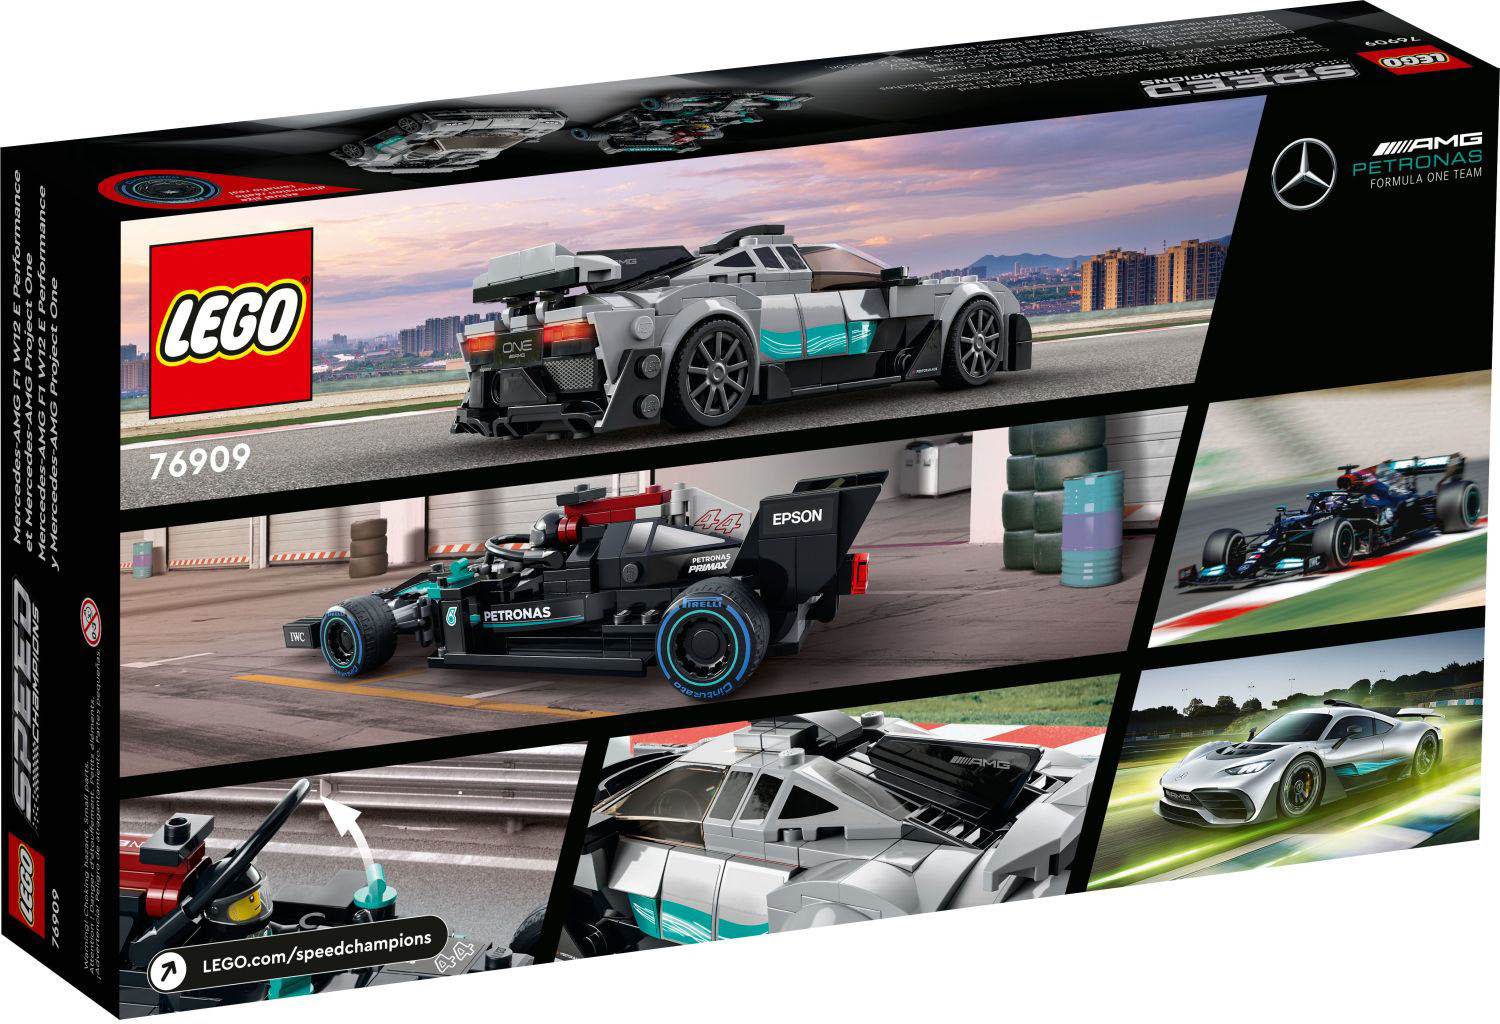 Lego 76909 Speed Champions Mercedes-AMG F1 W12 E Performance & Mercedes-AMG Project One